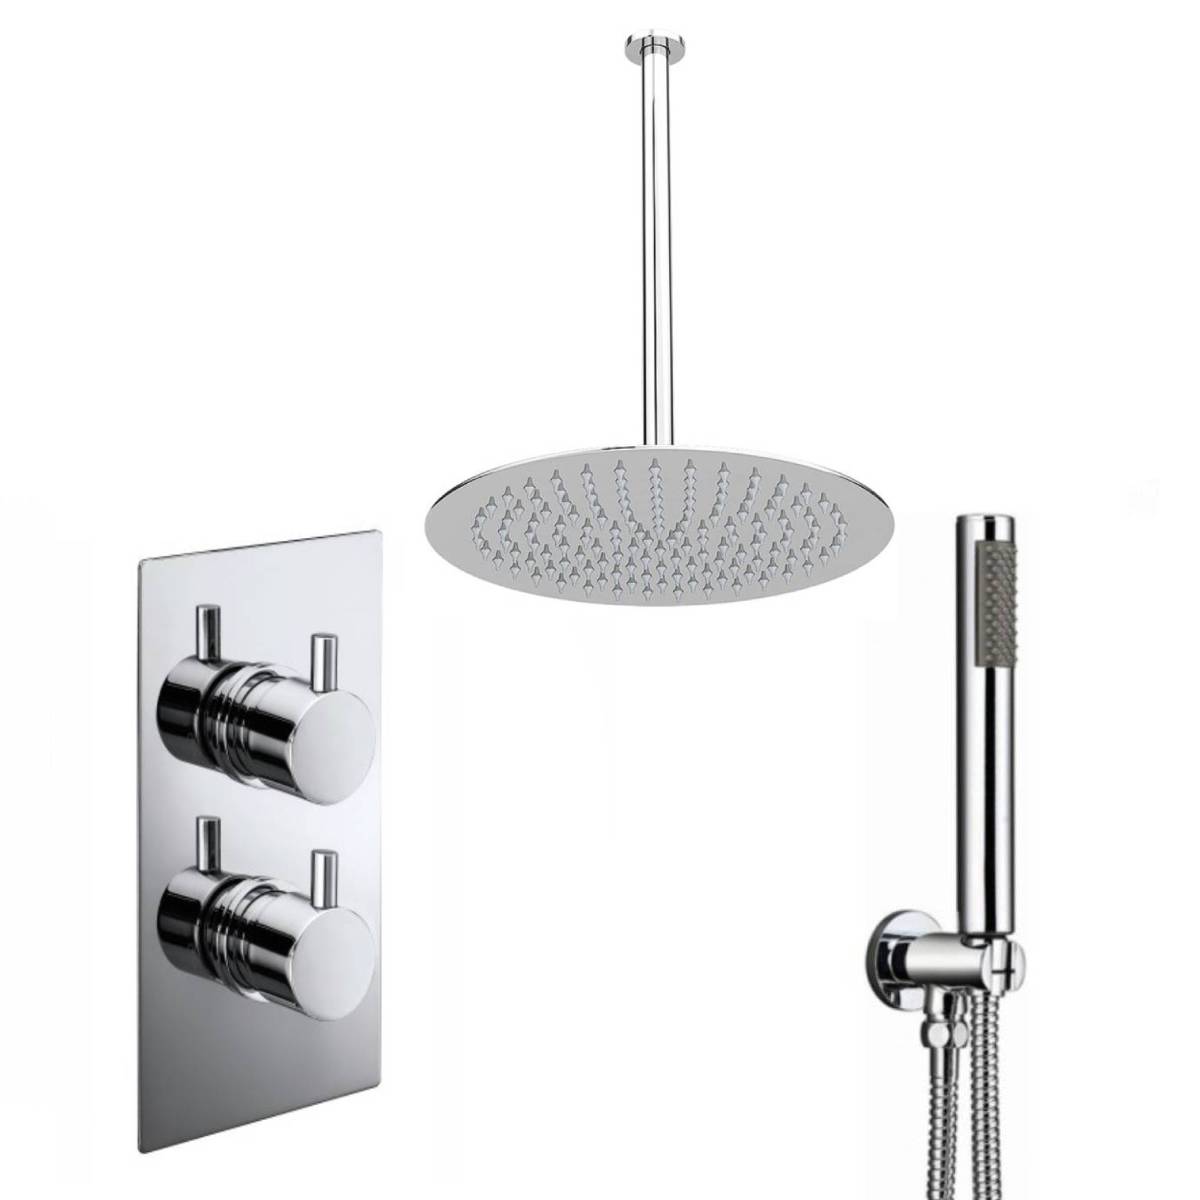 Round Twin Thermostatic Concealed Mixer Shower Kit with Ceiling Mounted 300mm Shower Head & Handset (12494)